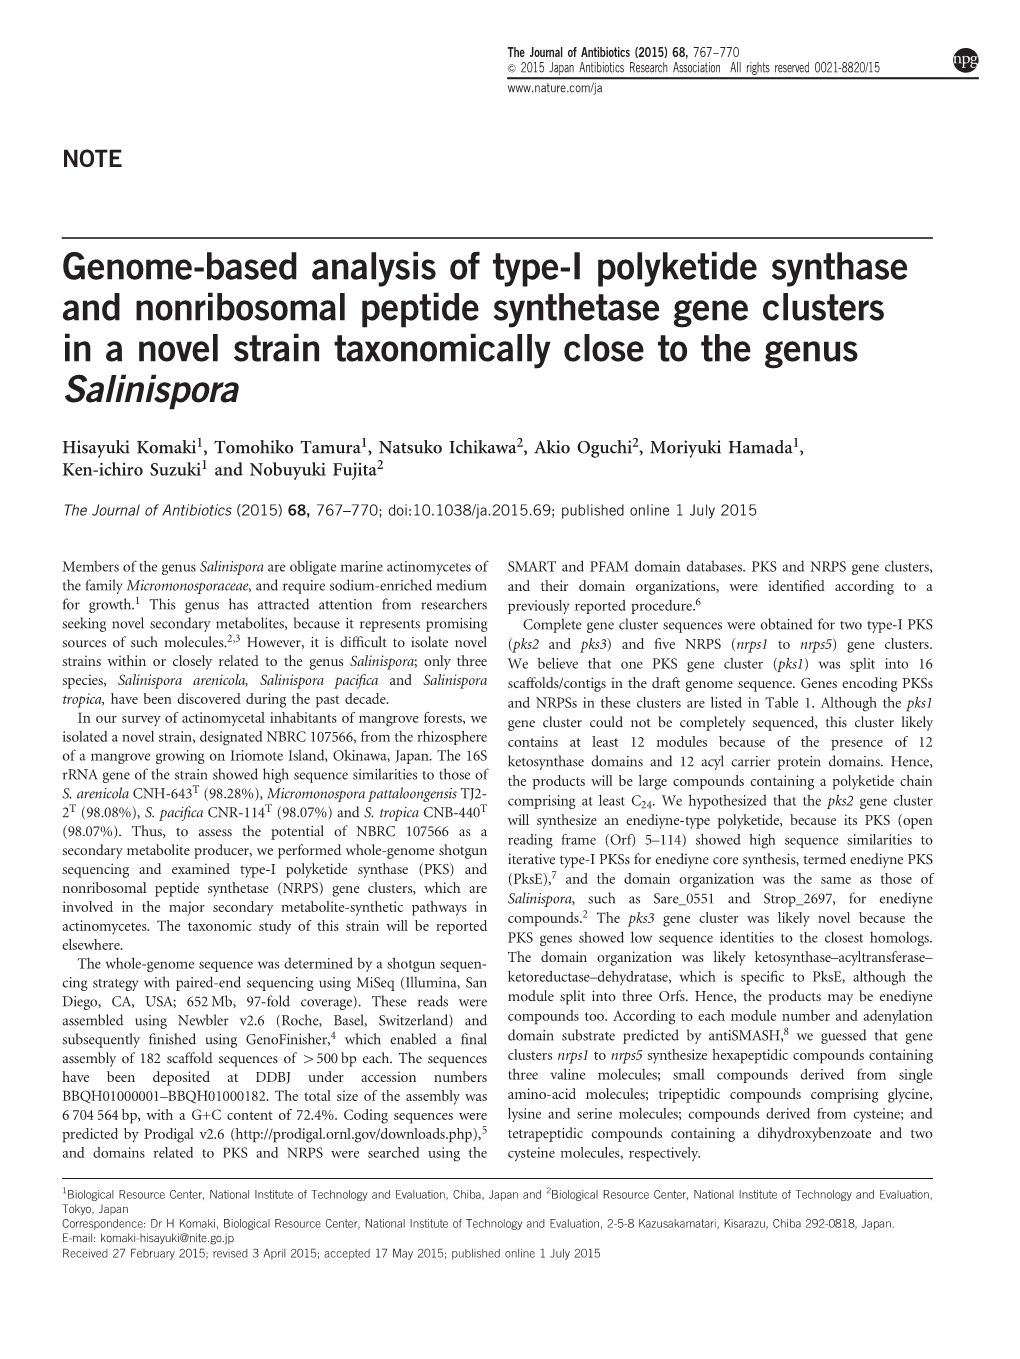 Genome-Based Analysis of Type-I Polyketide Synthase and Nonribosomal Peptide Synthetase Gene Clusters in a Novel Strain Taxonomically Close to the Genus Salinispora